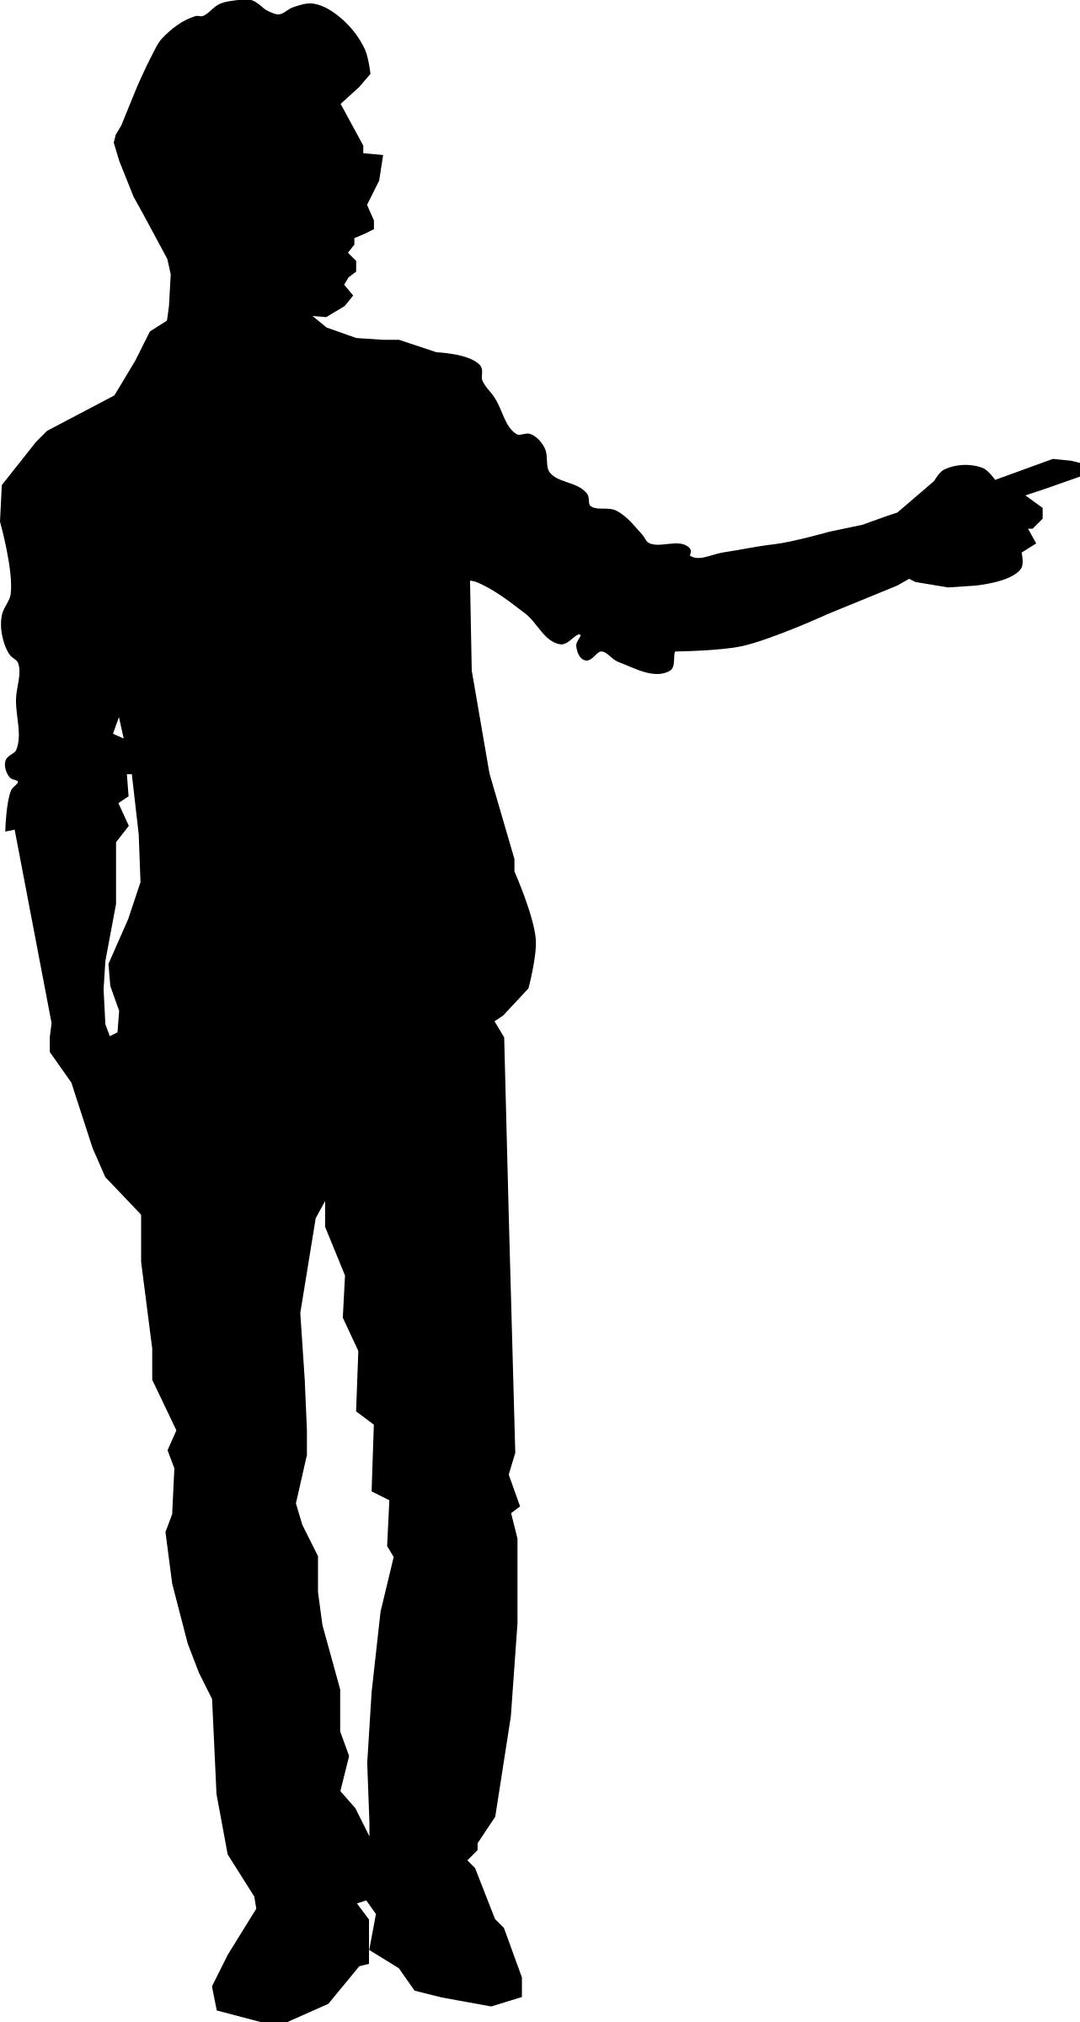 Pointing Man png transparent